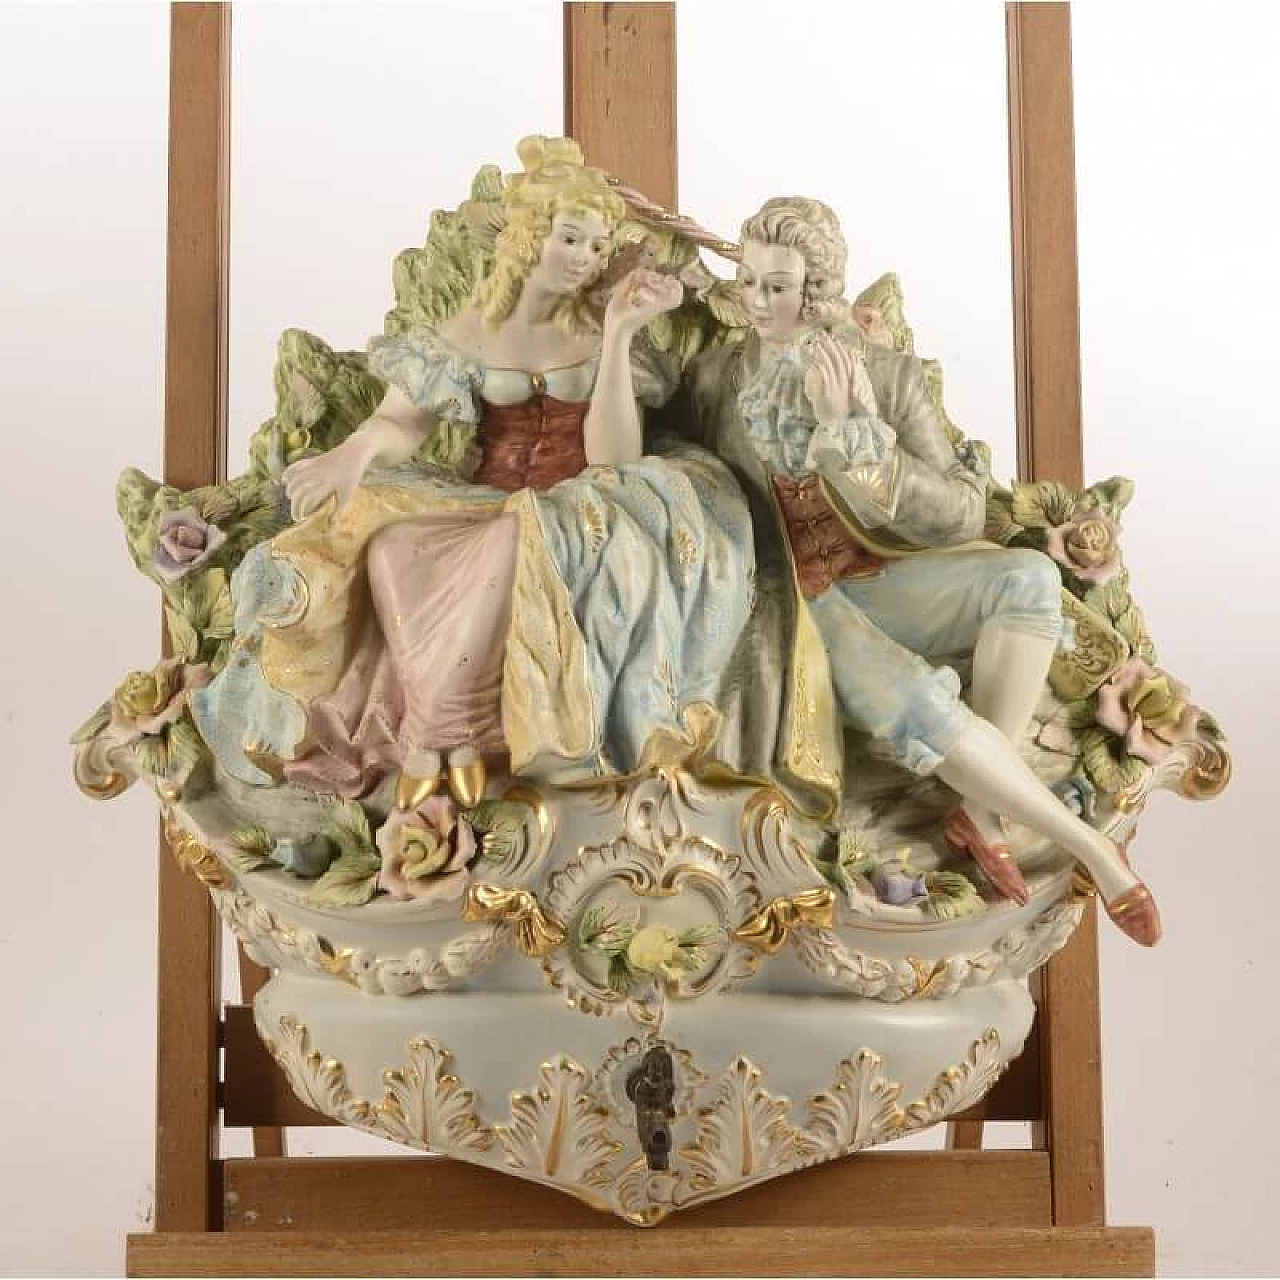 Sculptural group depicting two lovers in 18th century ceramic costumes 1361355